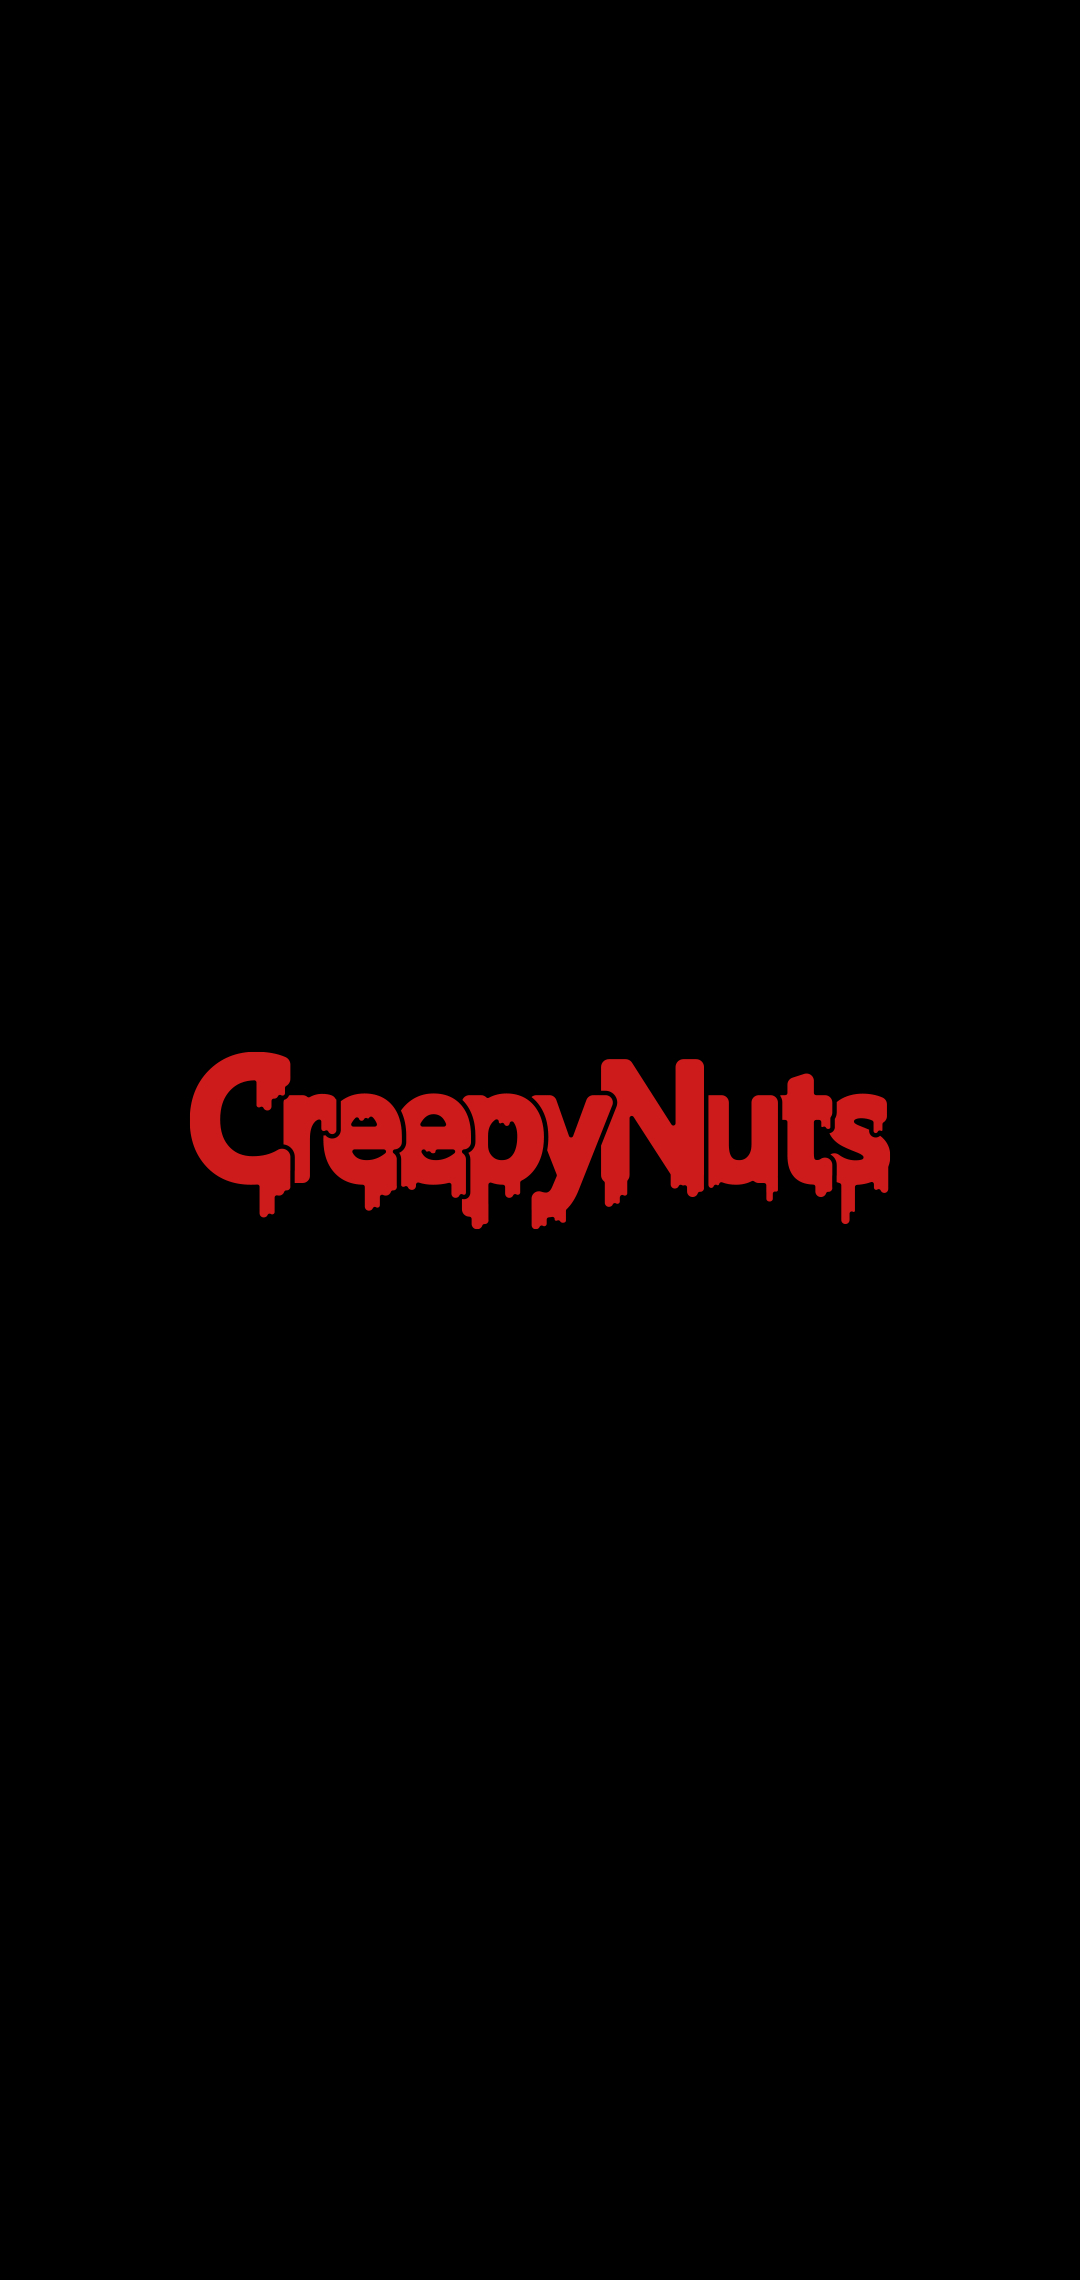 Creepy Nuts Android One S8 壁紙・待ち受け